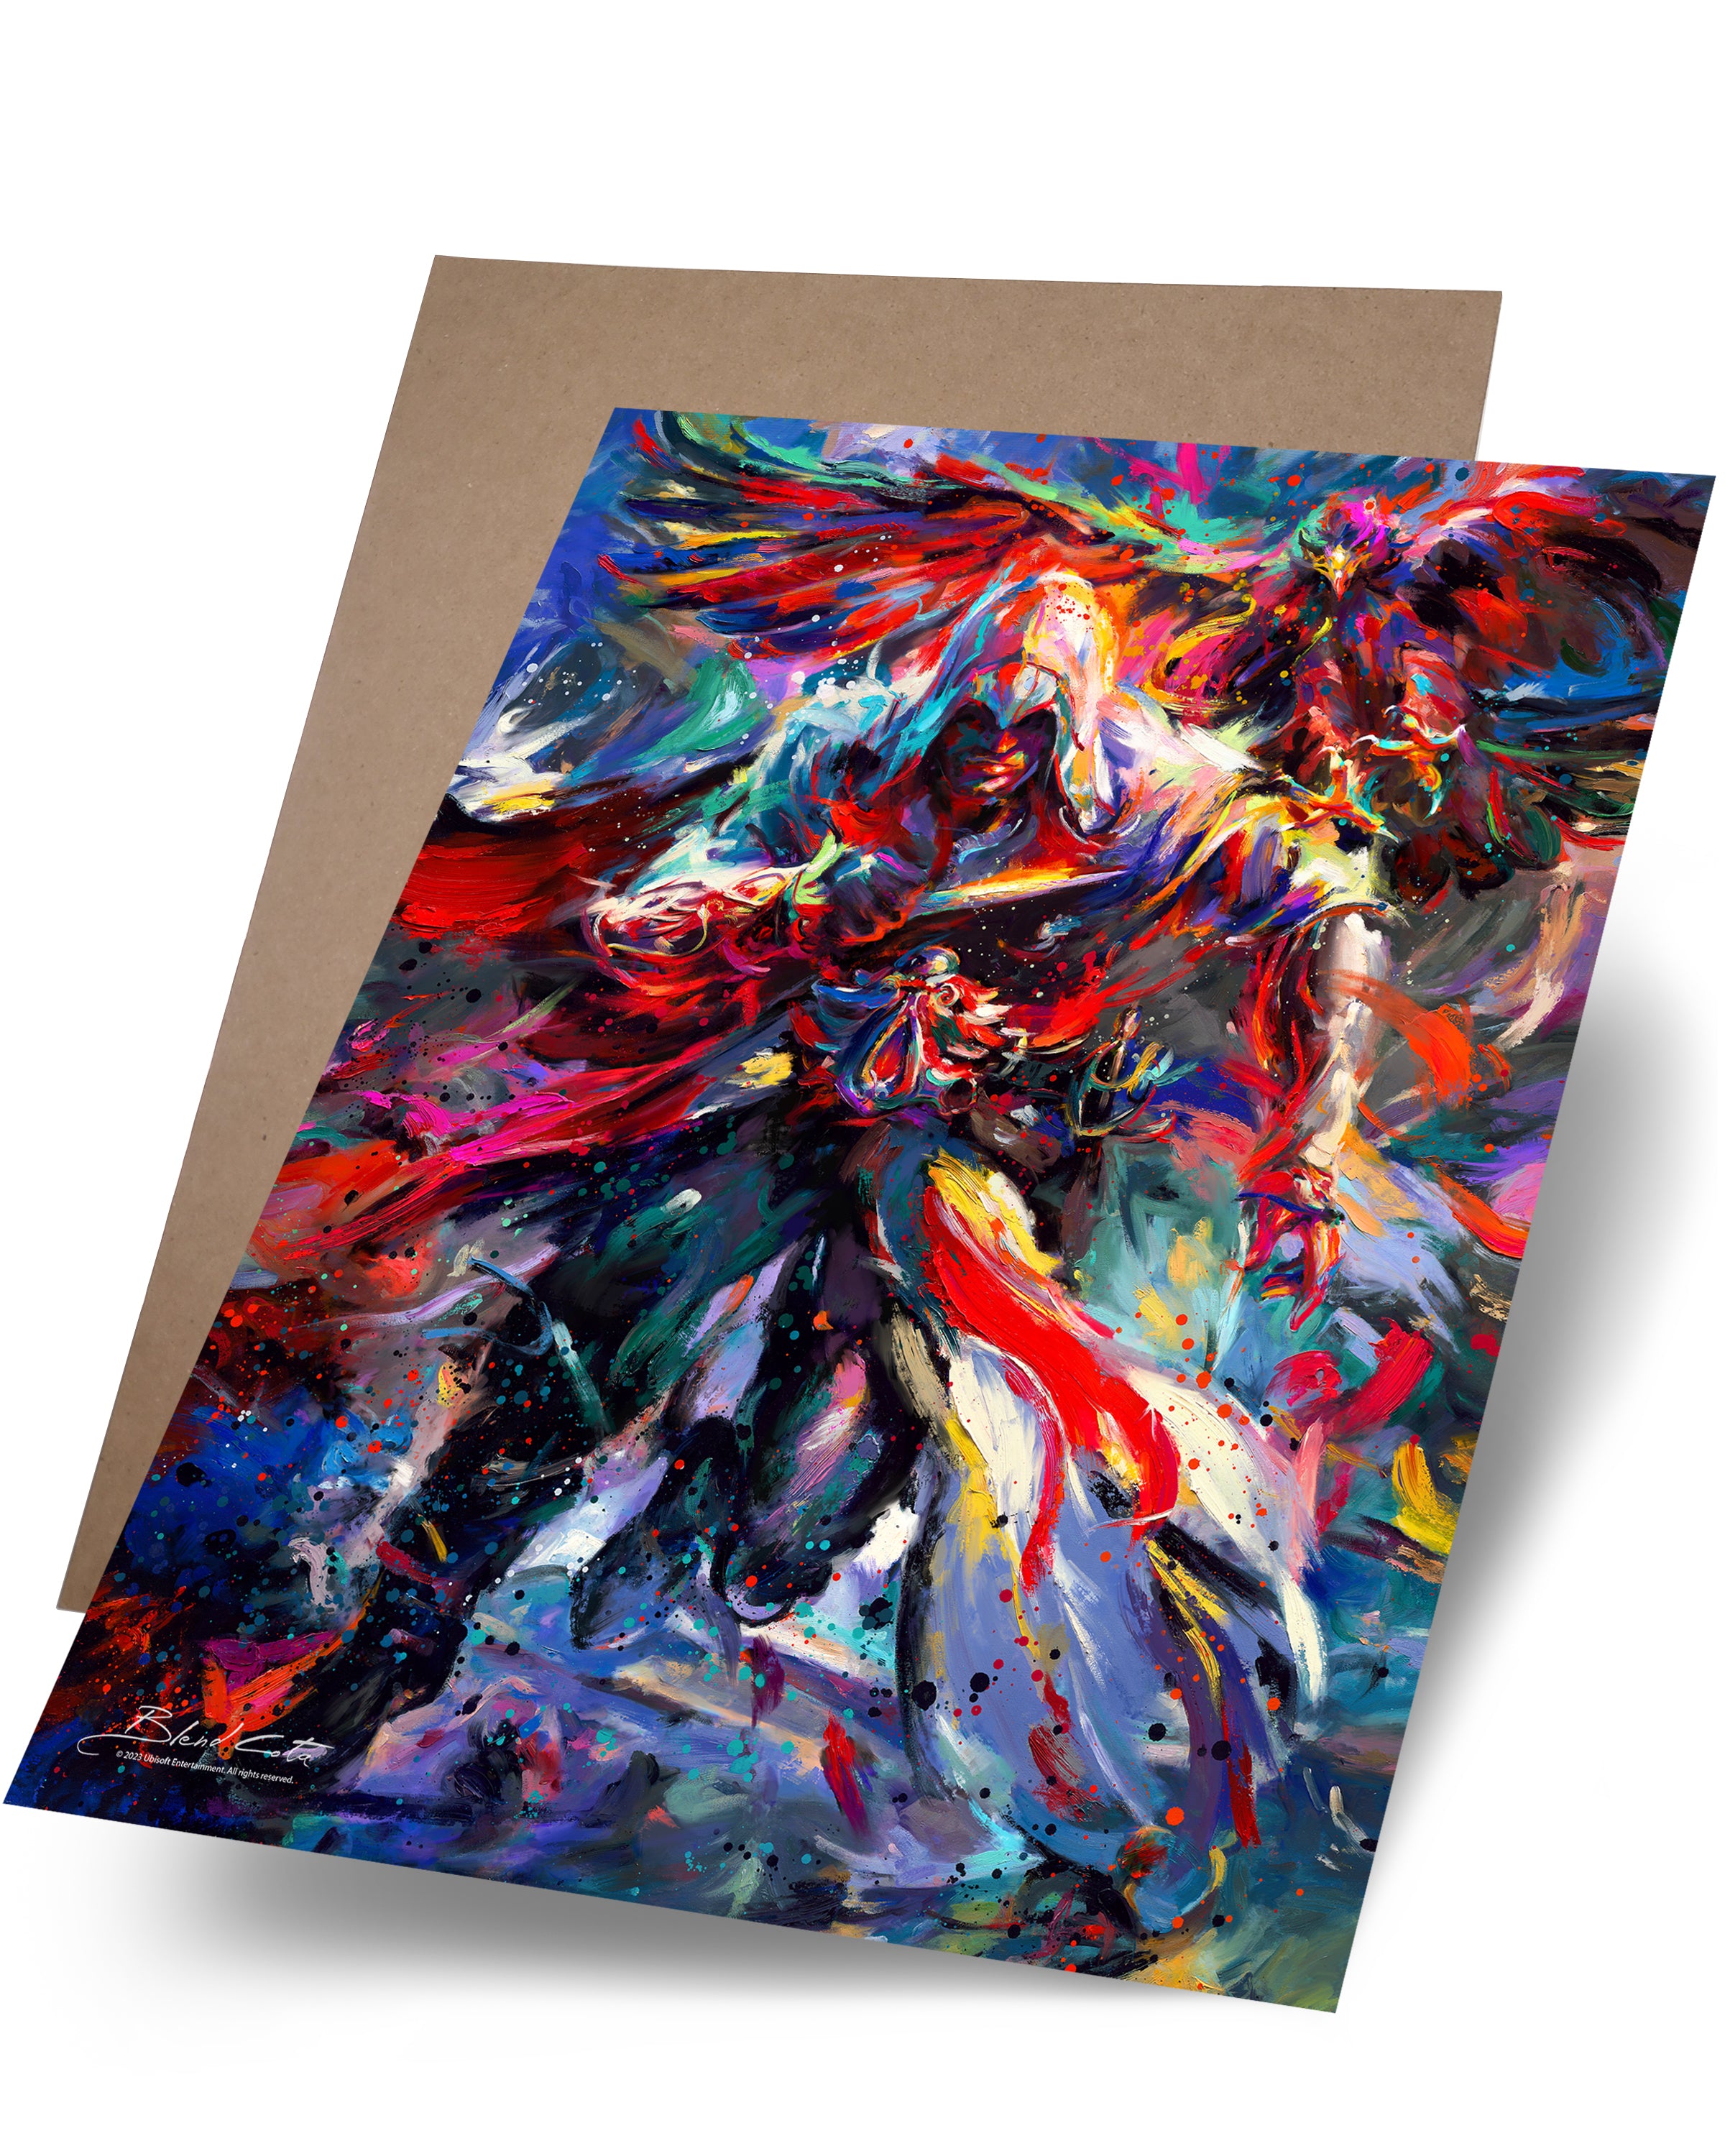 Art print on paper cardstock of Assassin's Creed Ezio Auditore and Eagle, bursting with colorful brushstrokes in an expressionist style.